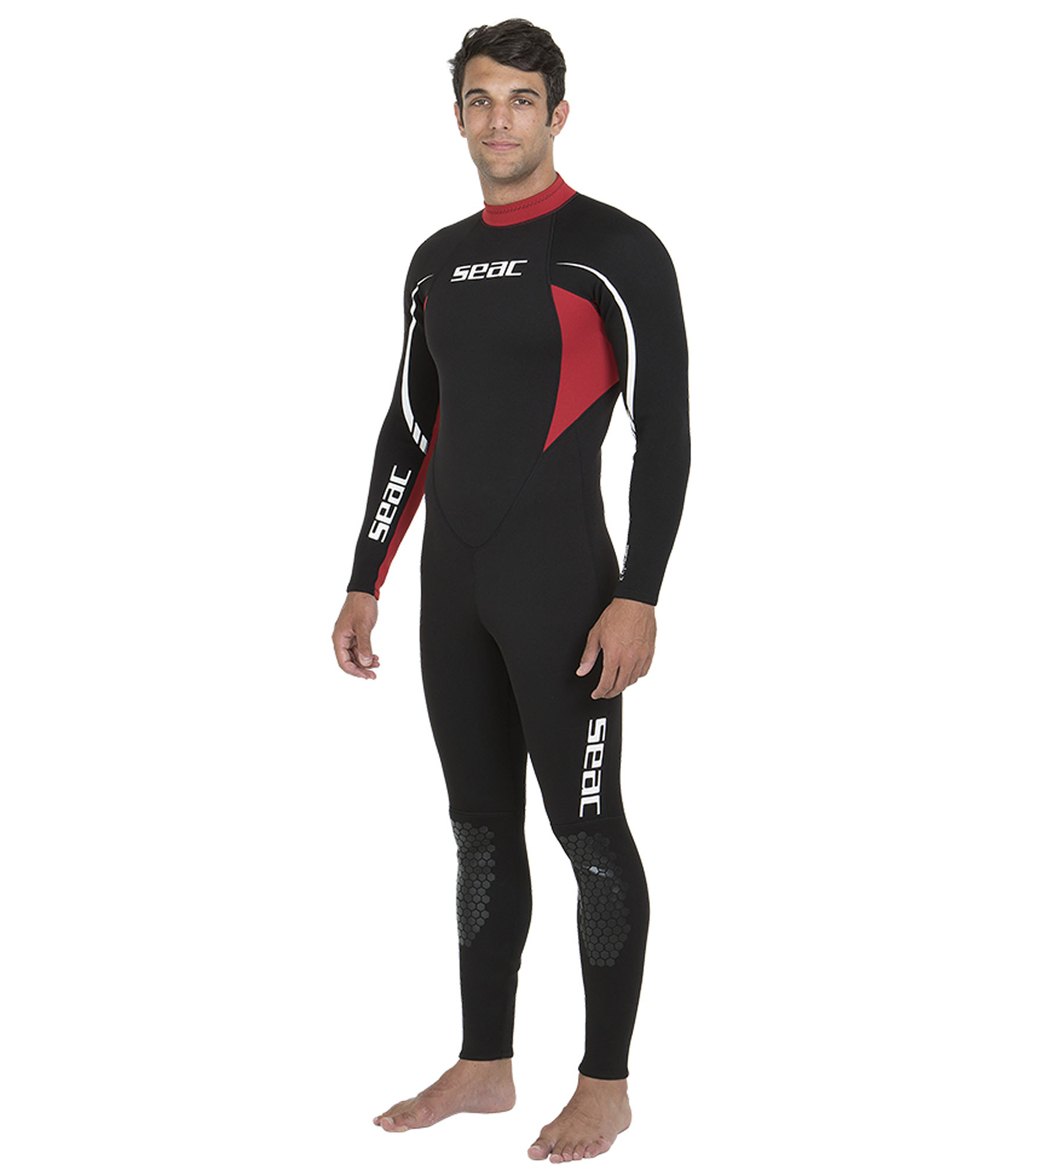 Seac USA Mens 2.2mm Relax Full Wetsuit